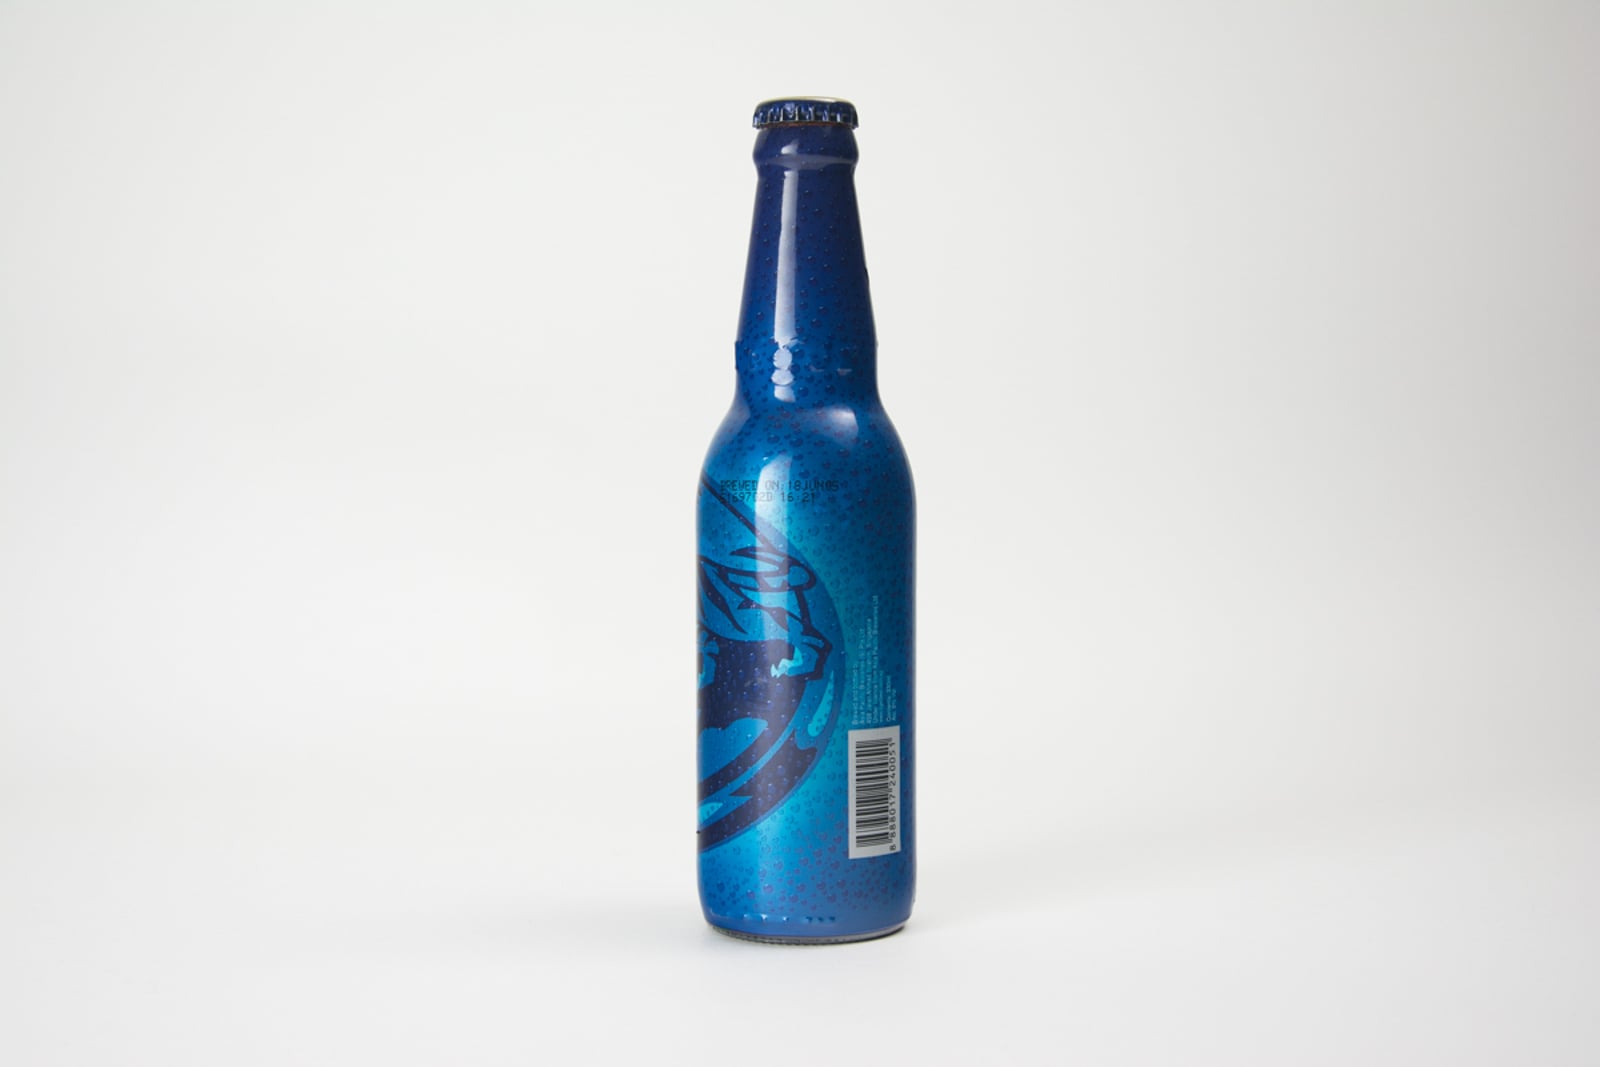 Tiger Beer Bottle In Blue Wrap With Large Logo And Orange Text